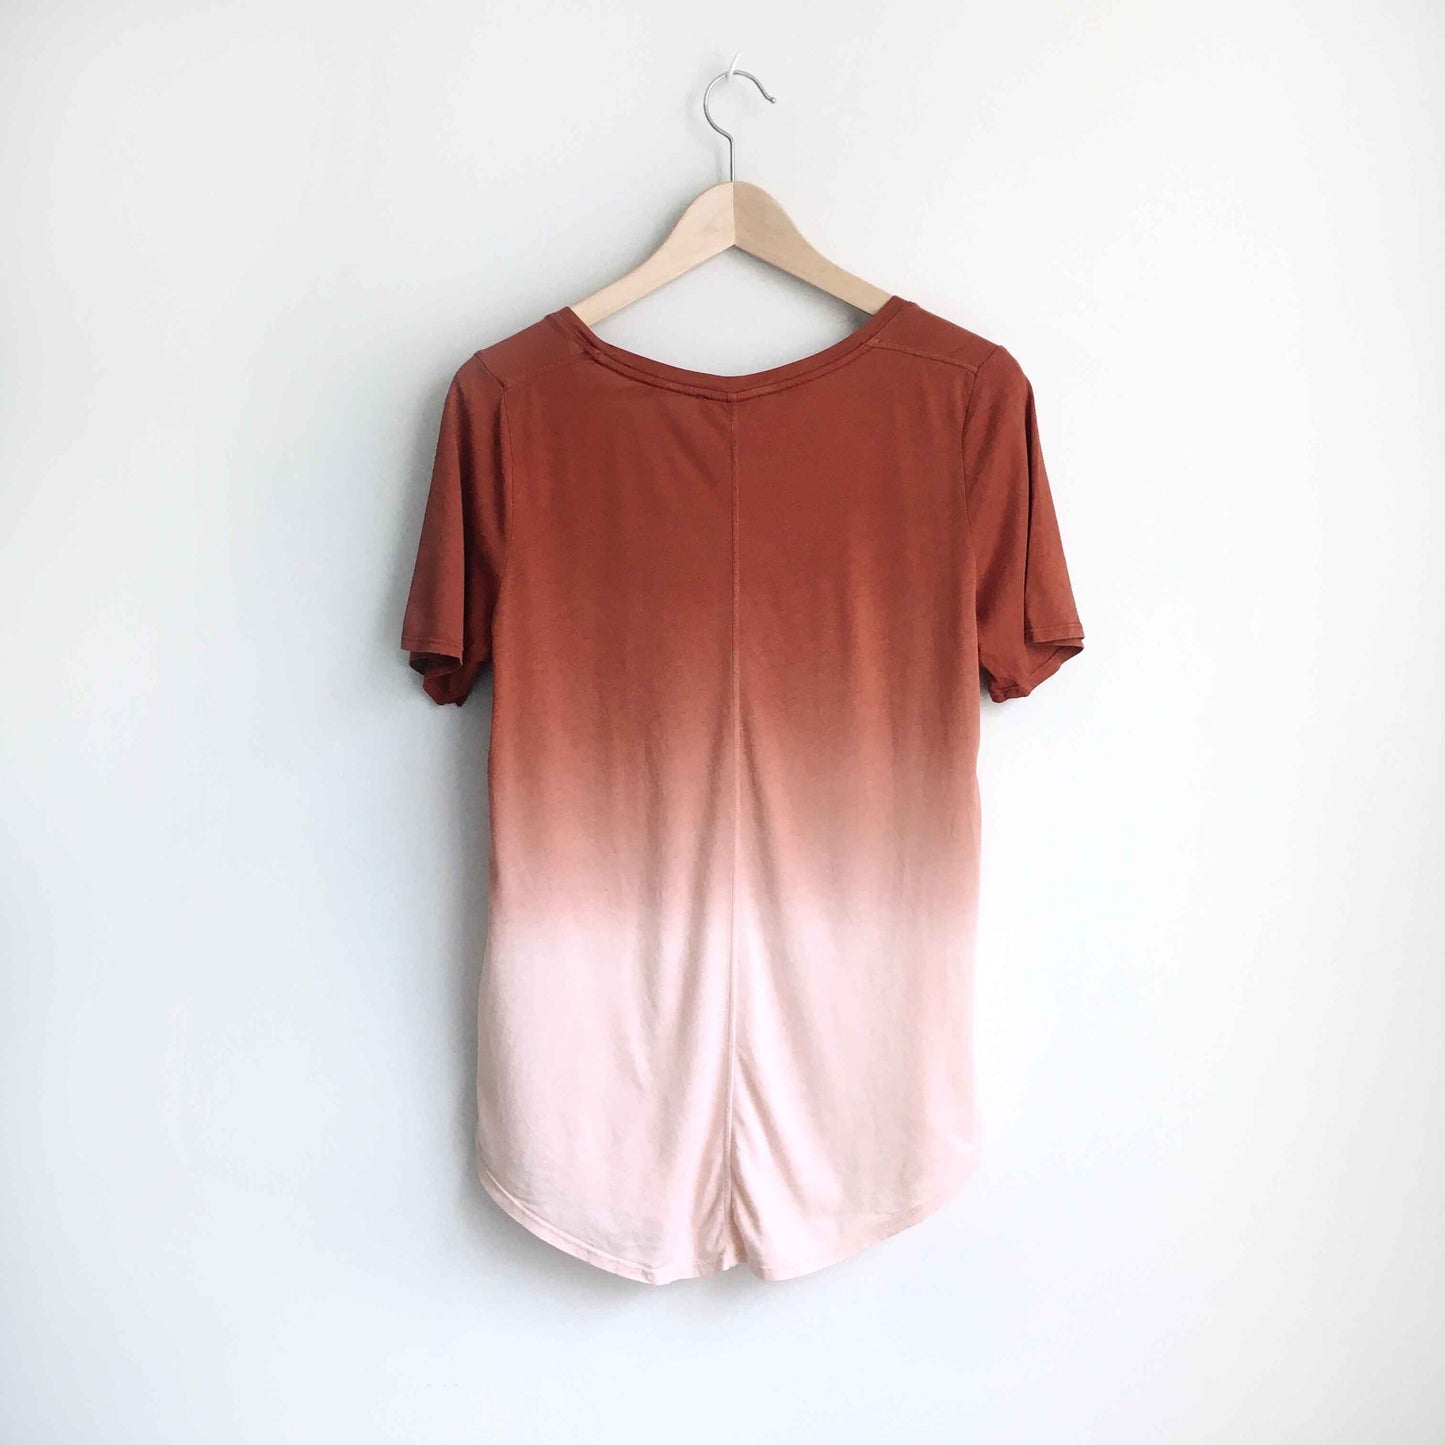 Babaton ombre pocket tee - size Small